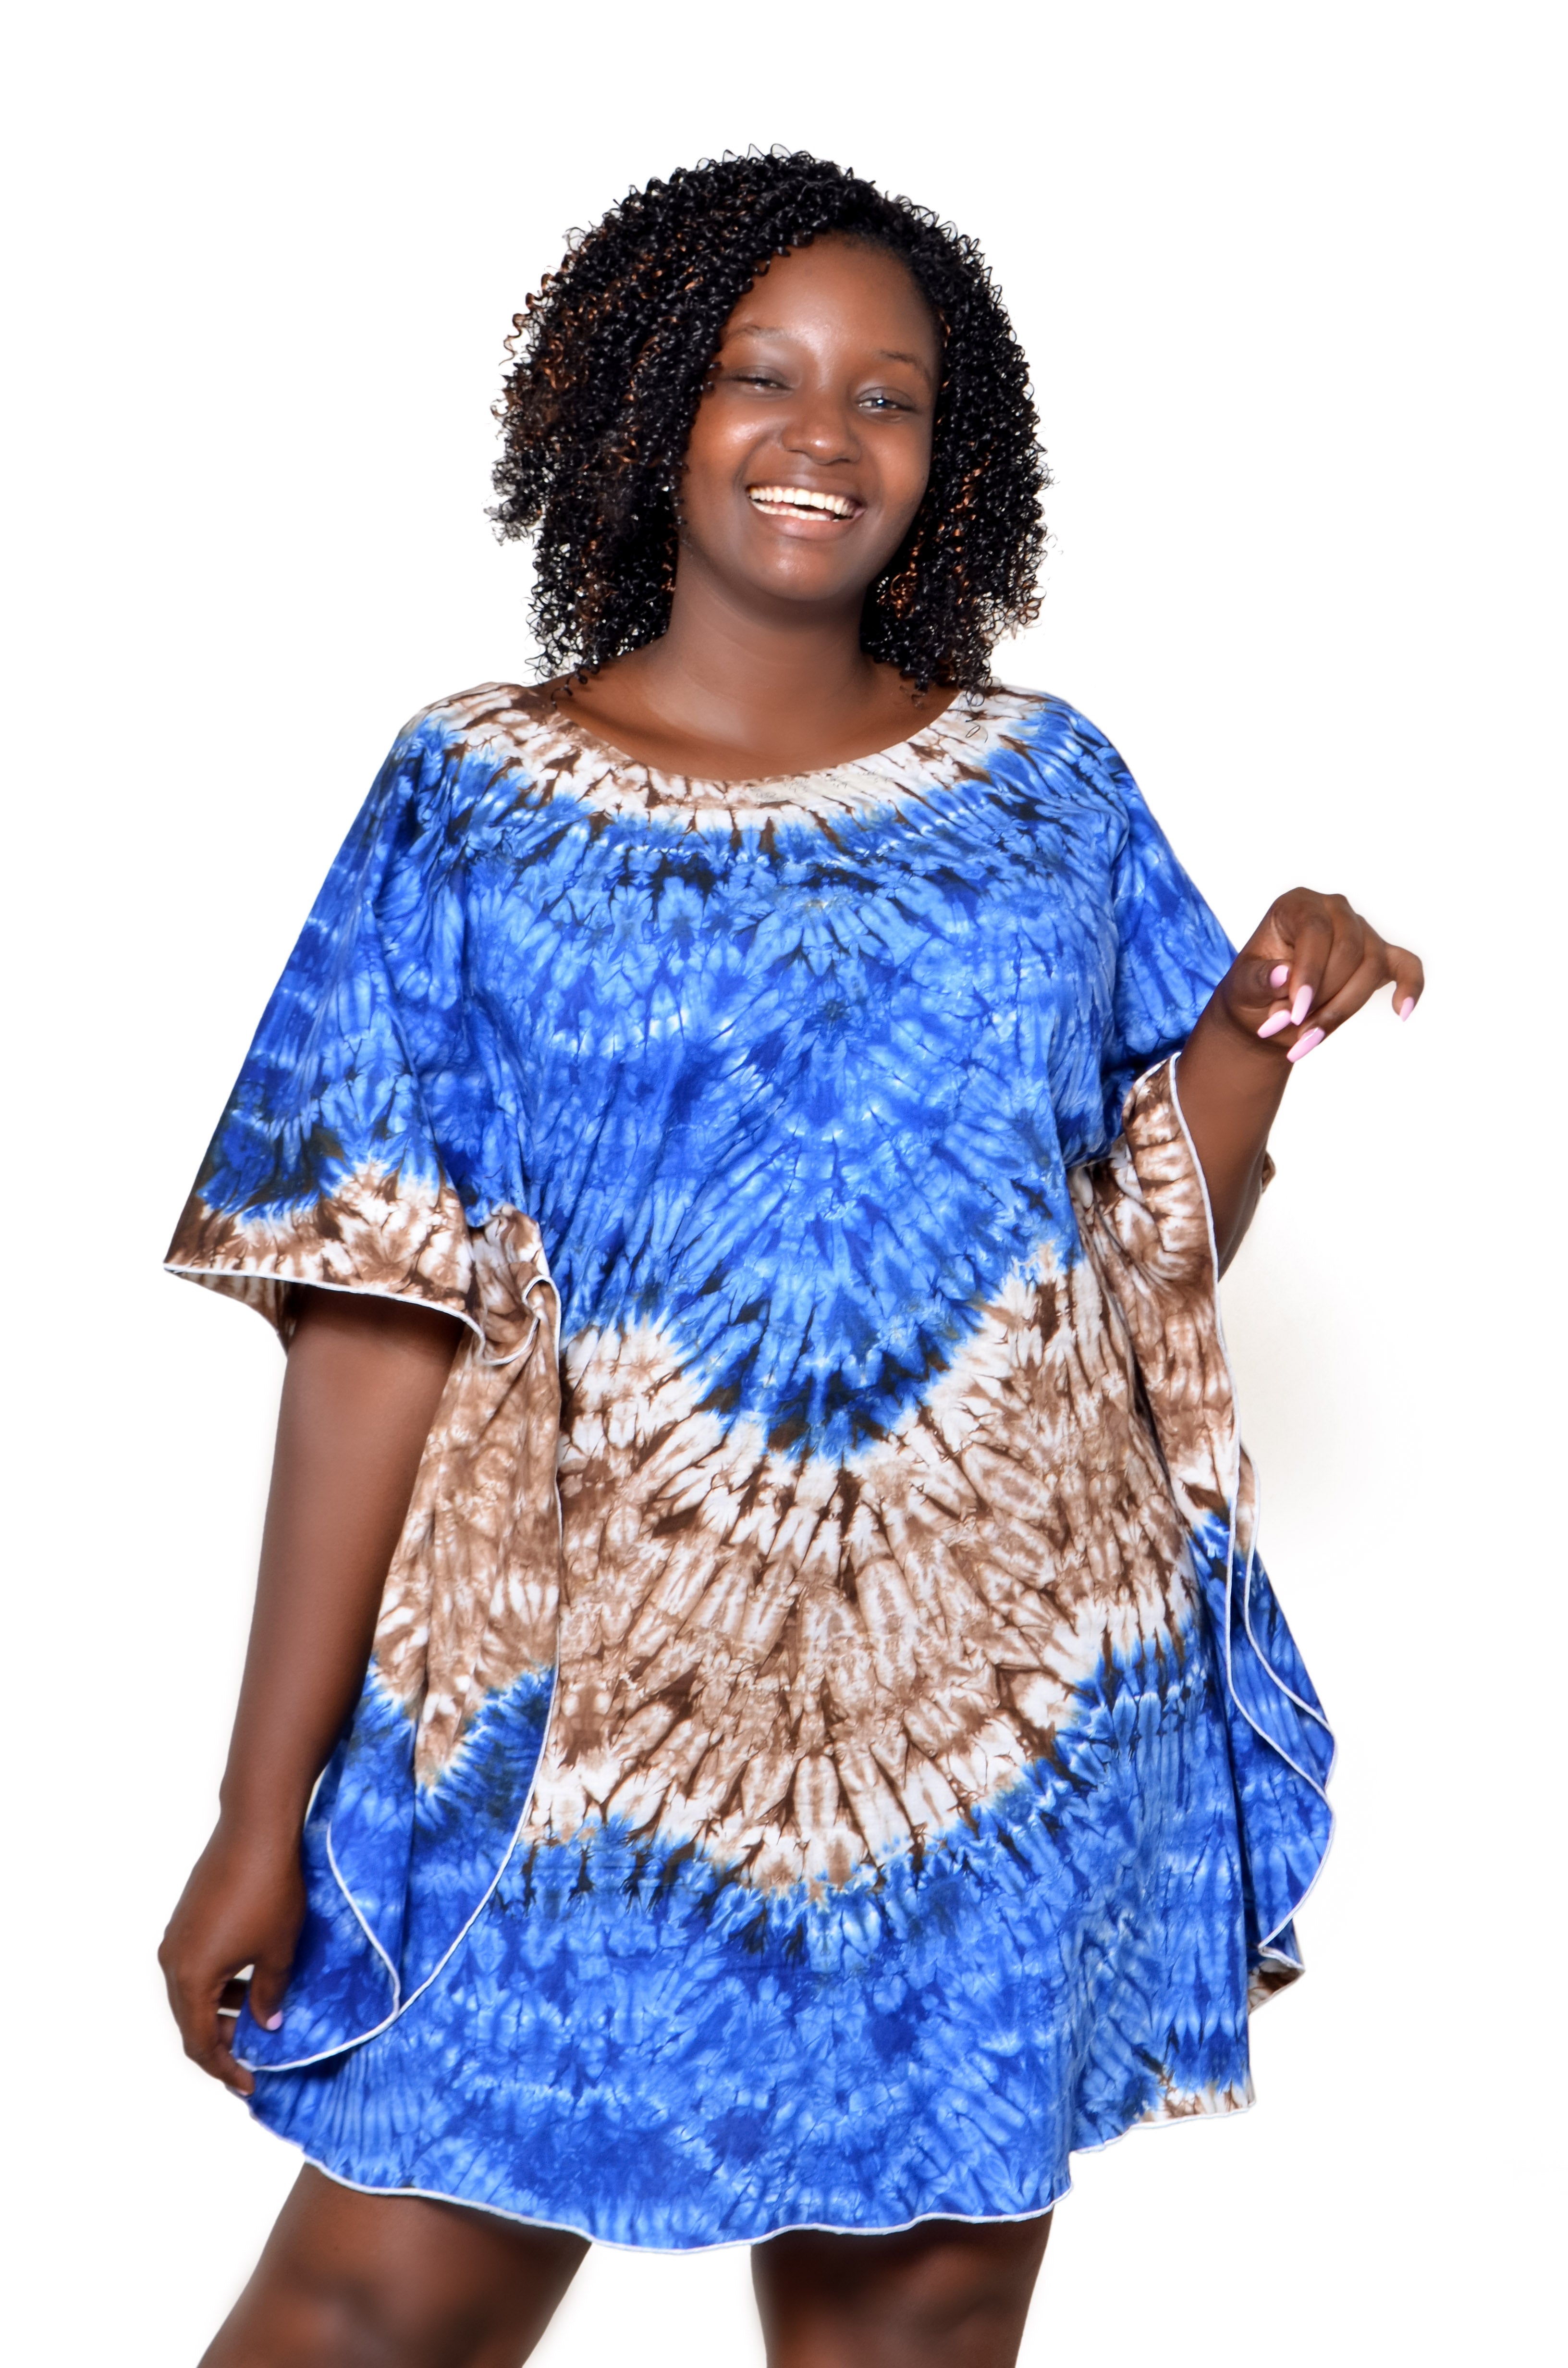 Penina Tie & Dye: Colorful and Vibrant African Dress Perfect that will delight for Any Occasion